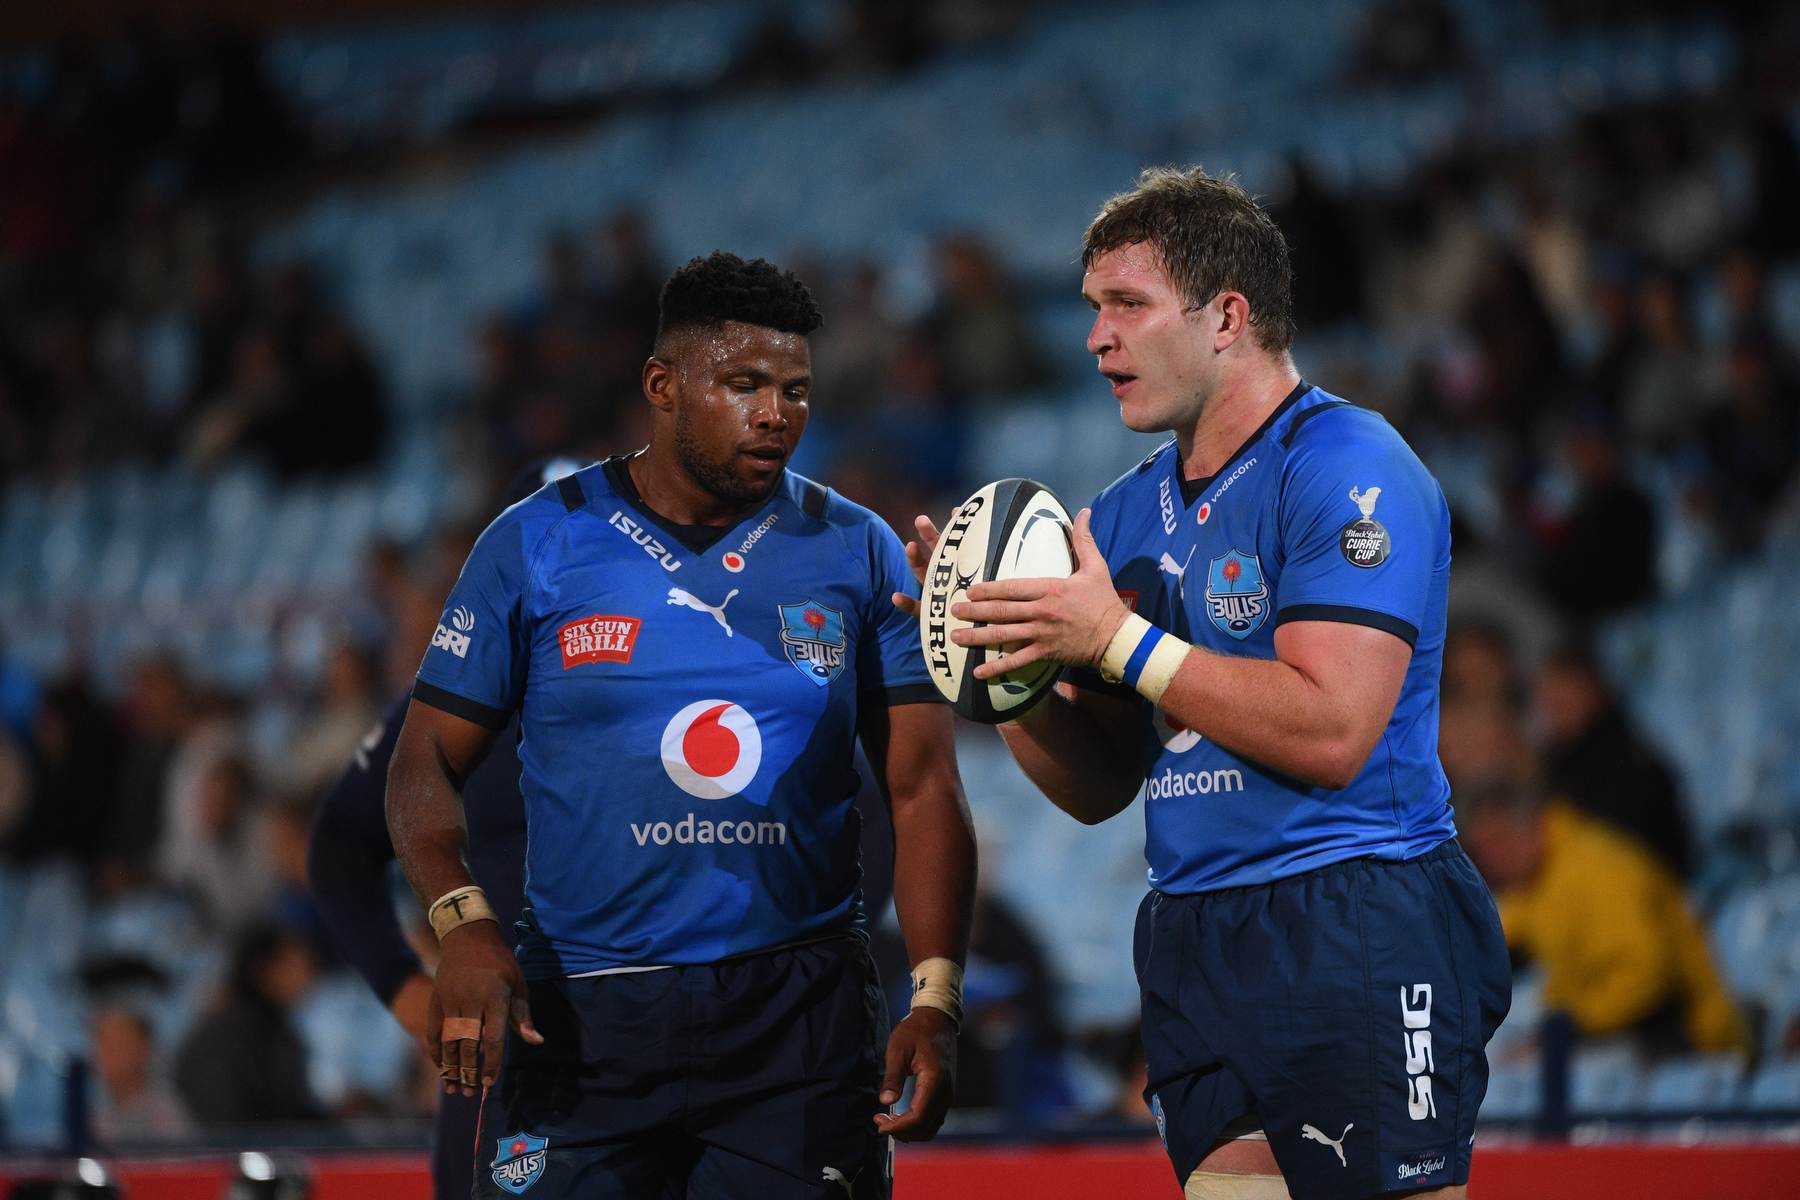 Vodacom Bulls bolster side for Carling Currie Cup semi